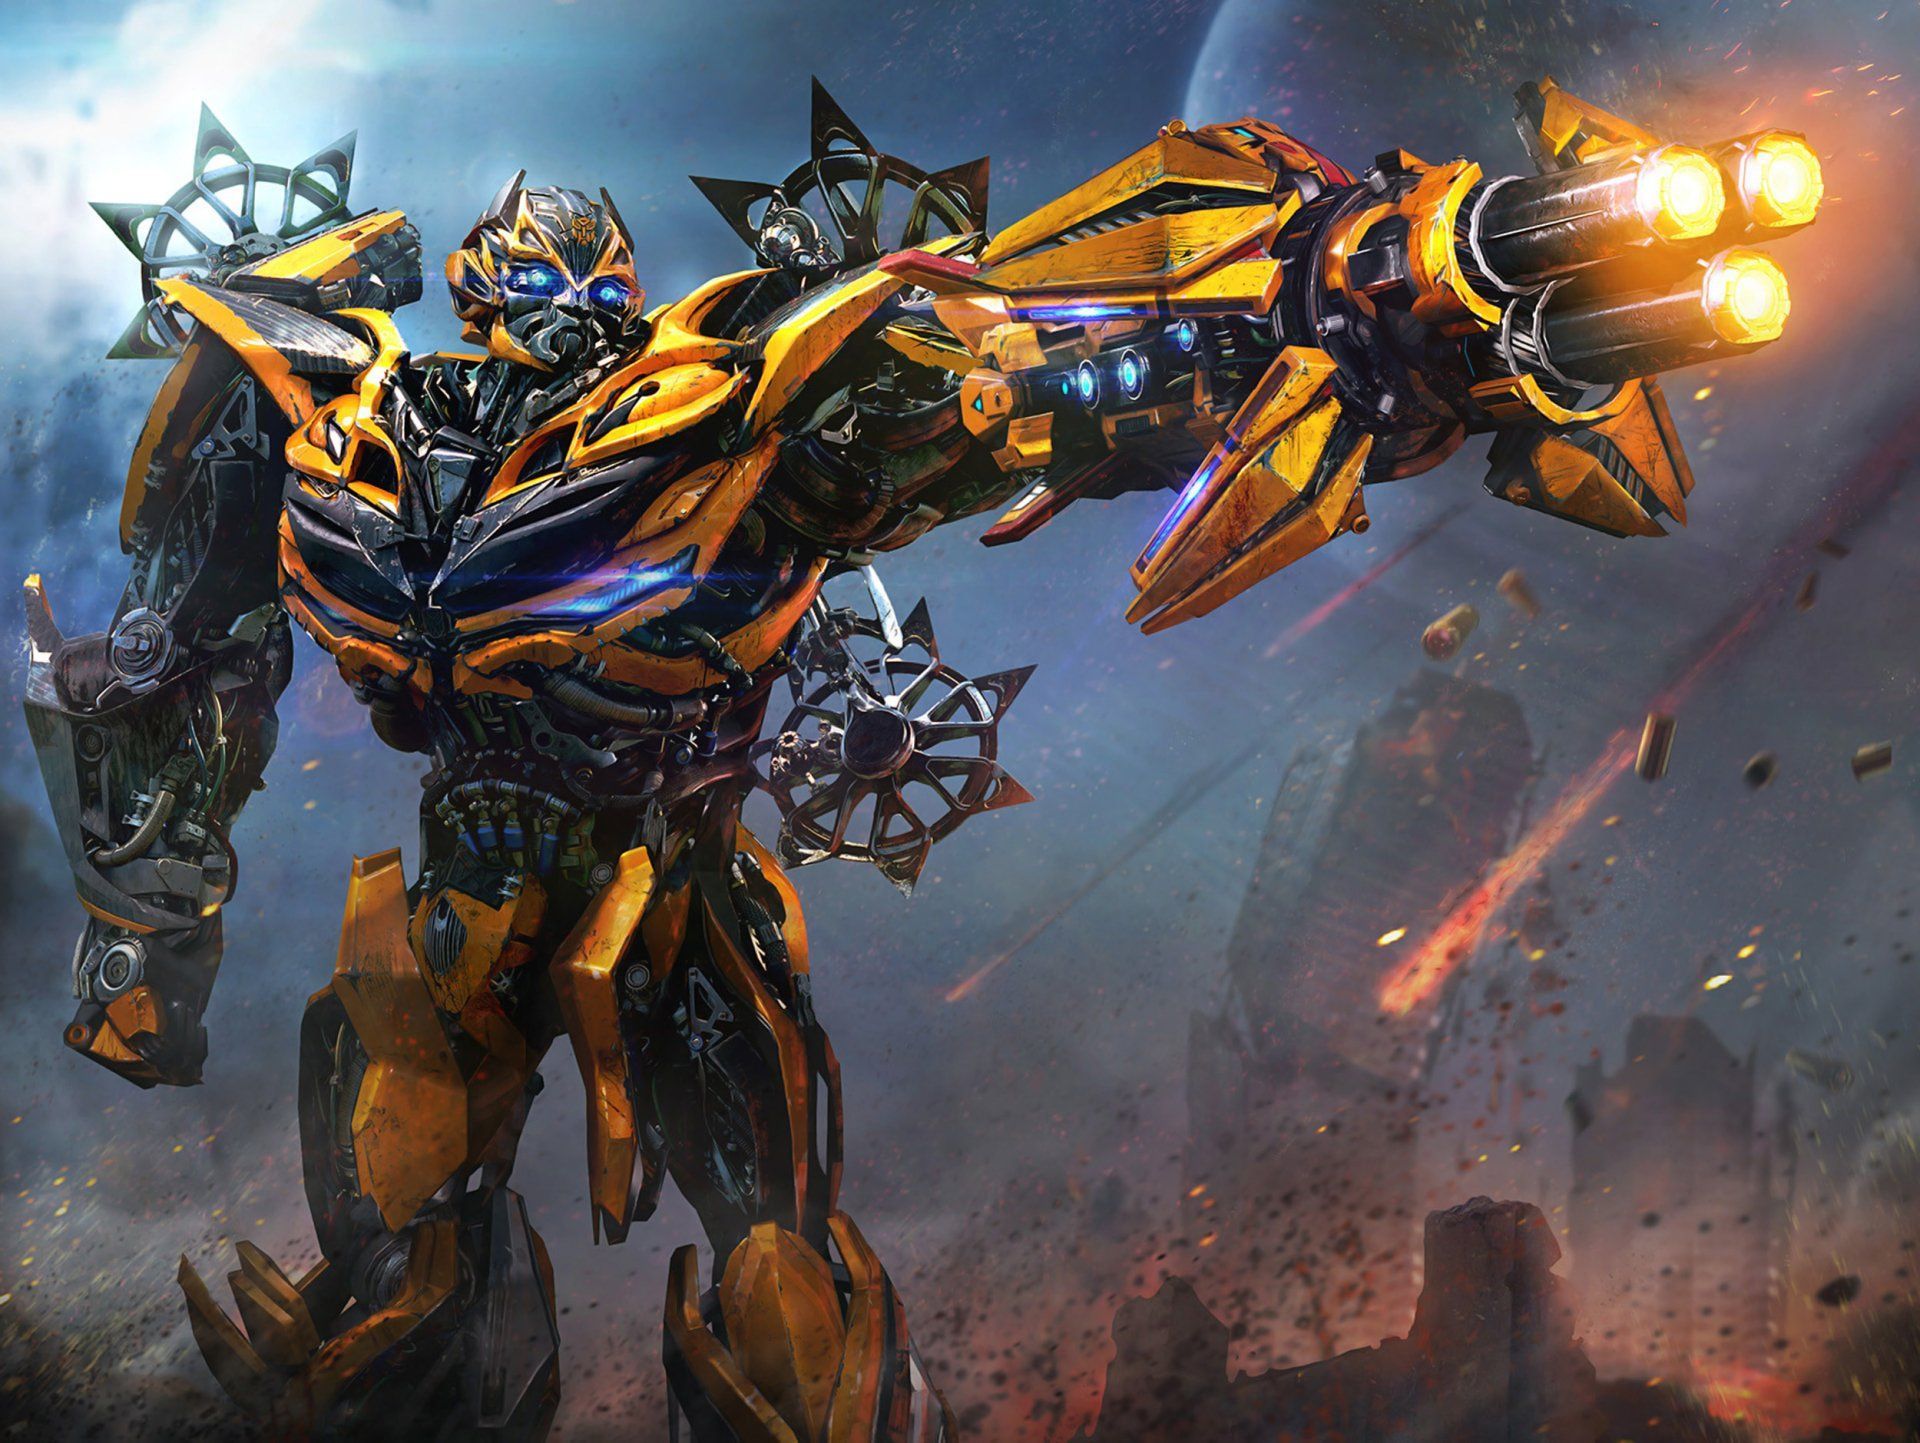 Bumblebee (Transformers) Wallpaper Background Image. View, download, comment,. Transformers megatron, Optimus prime wallpaper transformers, Transformers